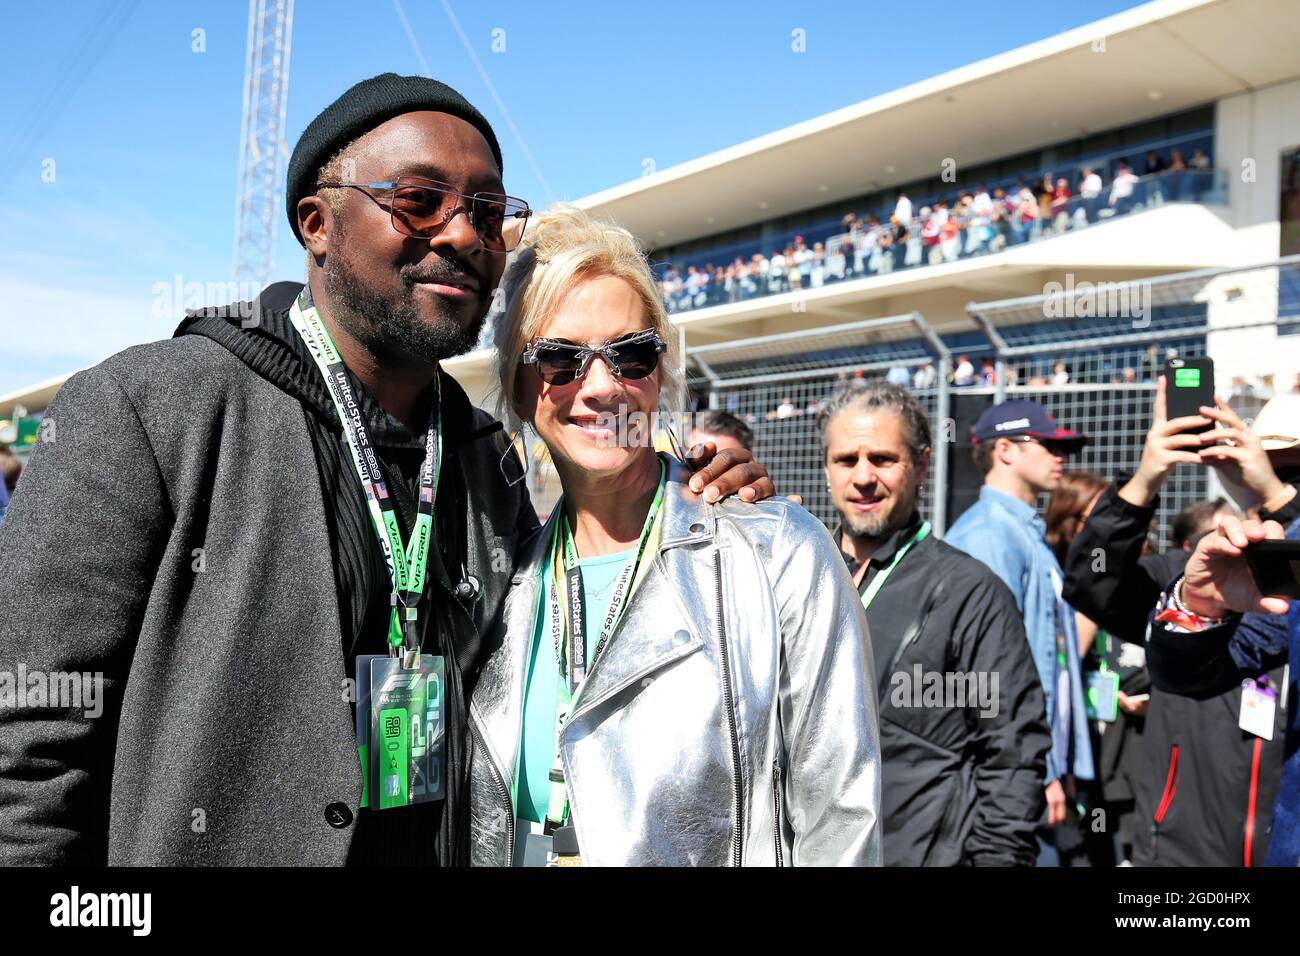 will.i.am on the grid. United States Grand Prix, Sunday 3rd November 2019. Circuit of the Americas, Austin, Texas, USA. Stock Photo